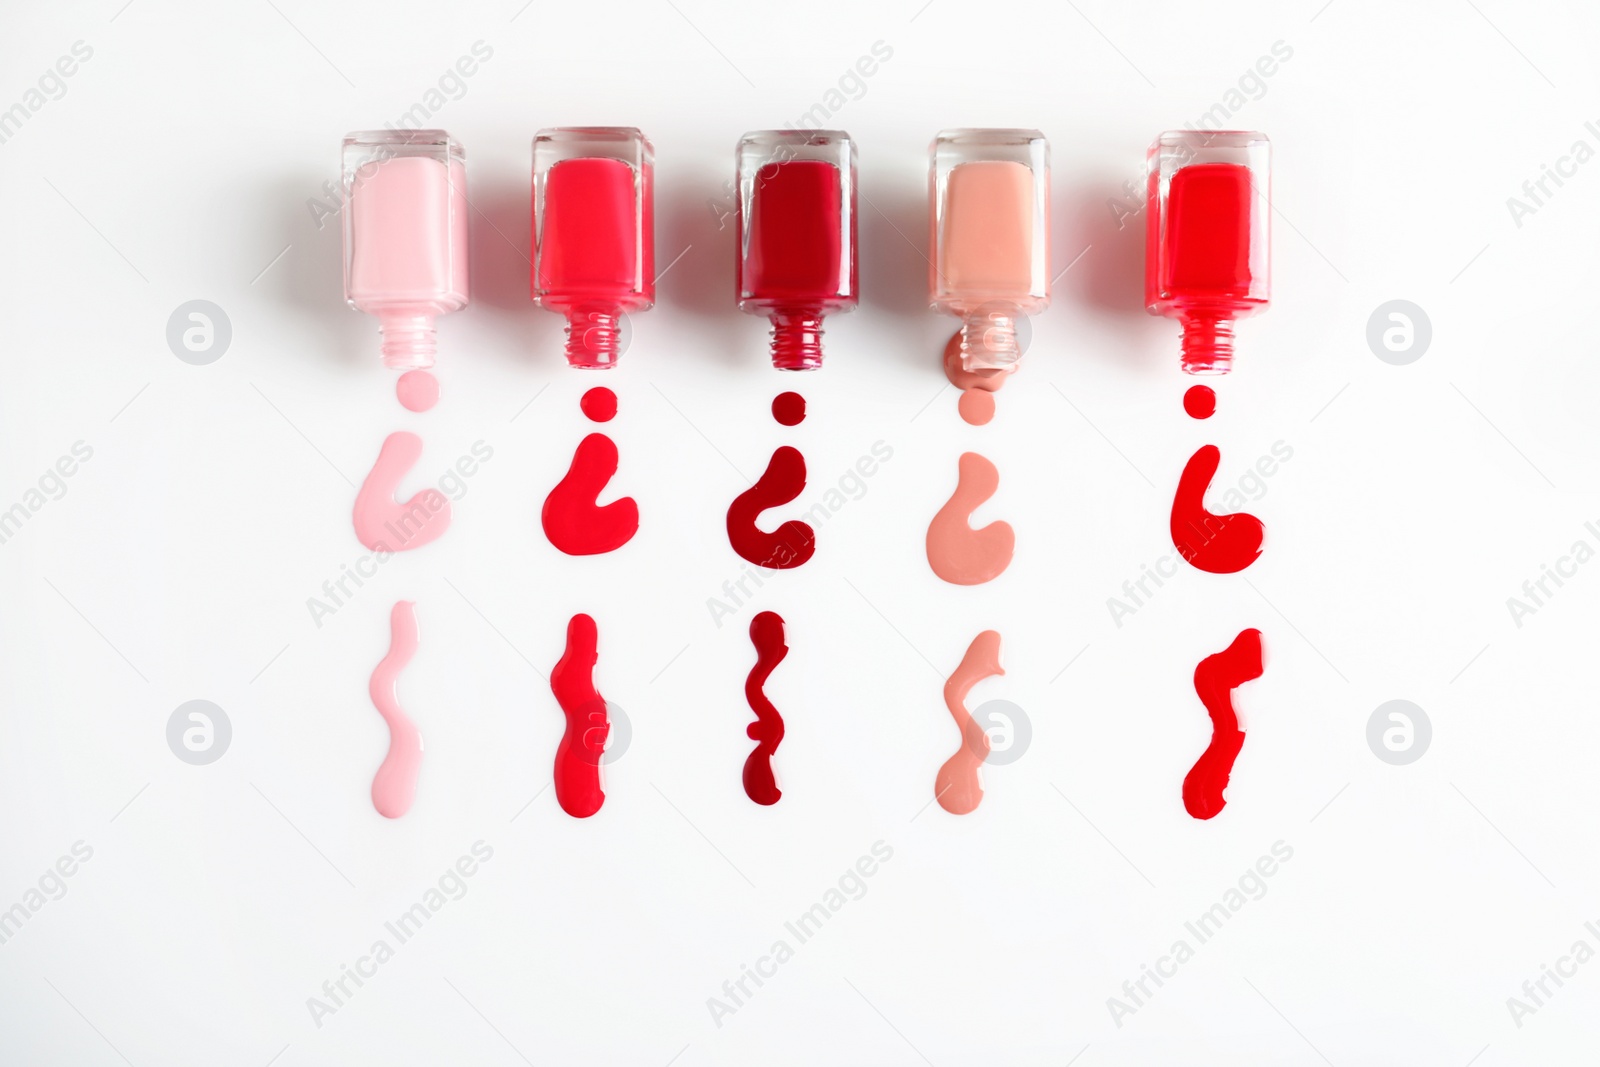 Photo of Spilled colorful nail polishes and bottles on white background, top view